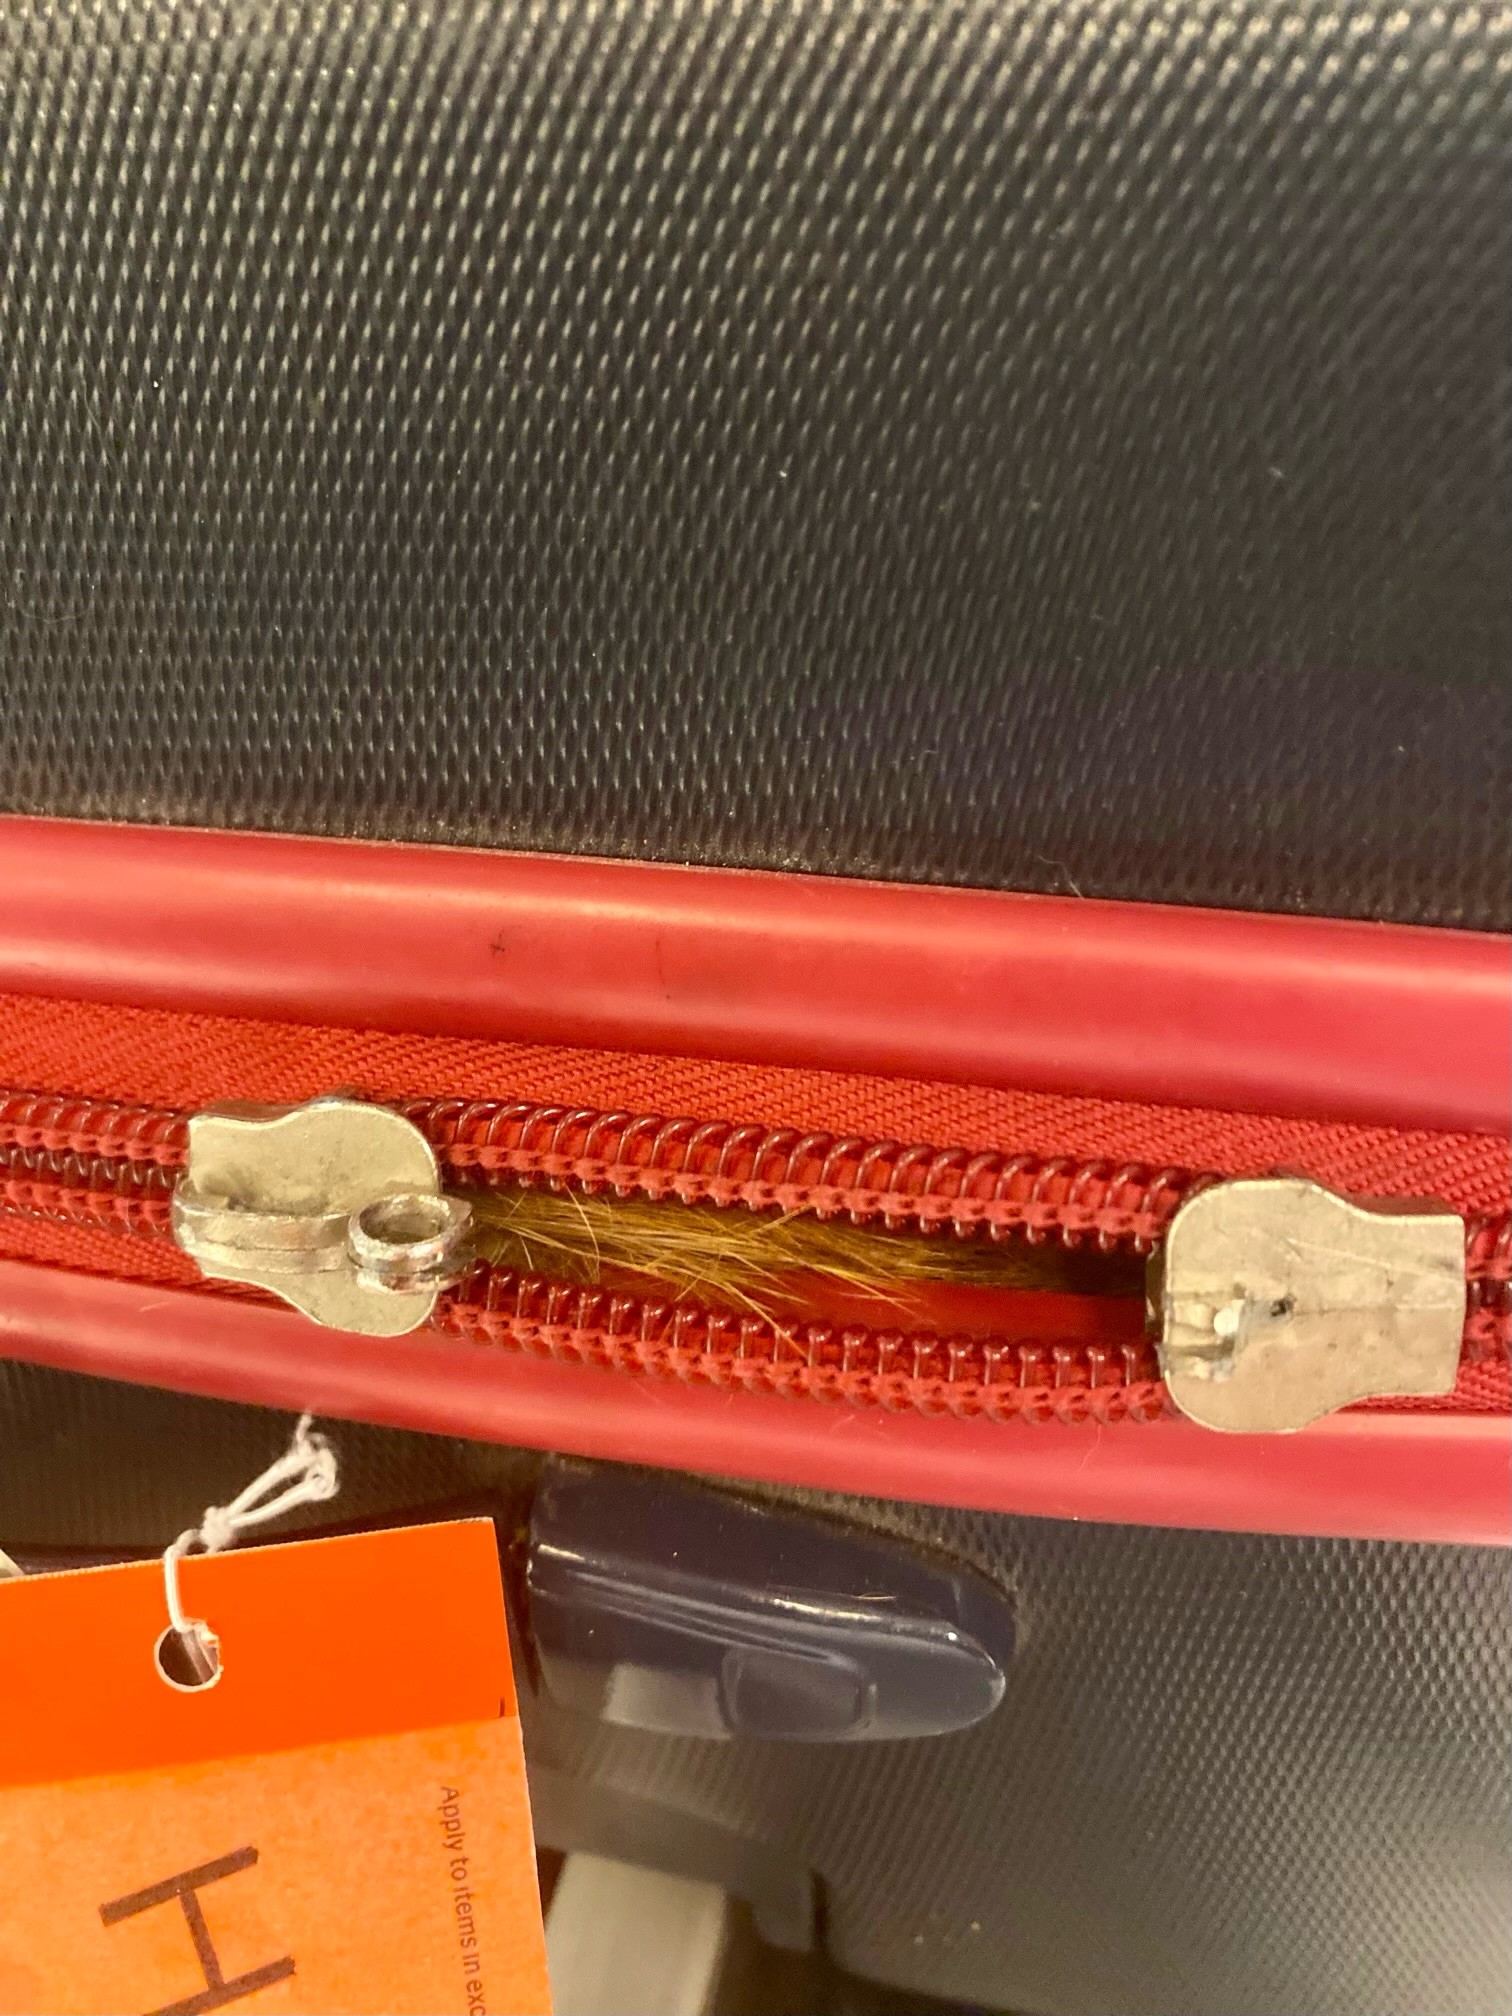 Picture of the orange hair sticking out of the suitcase.